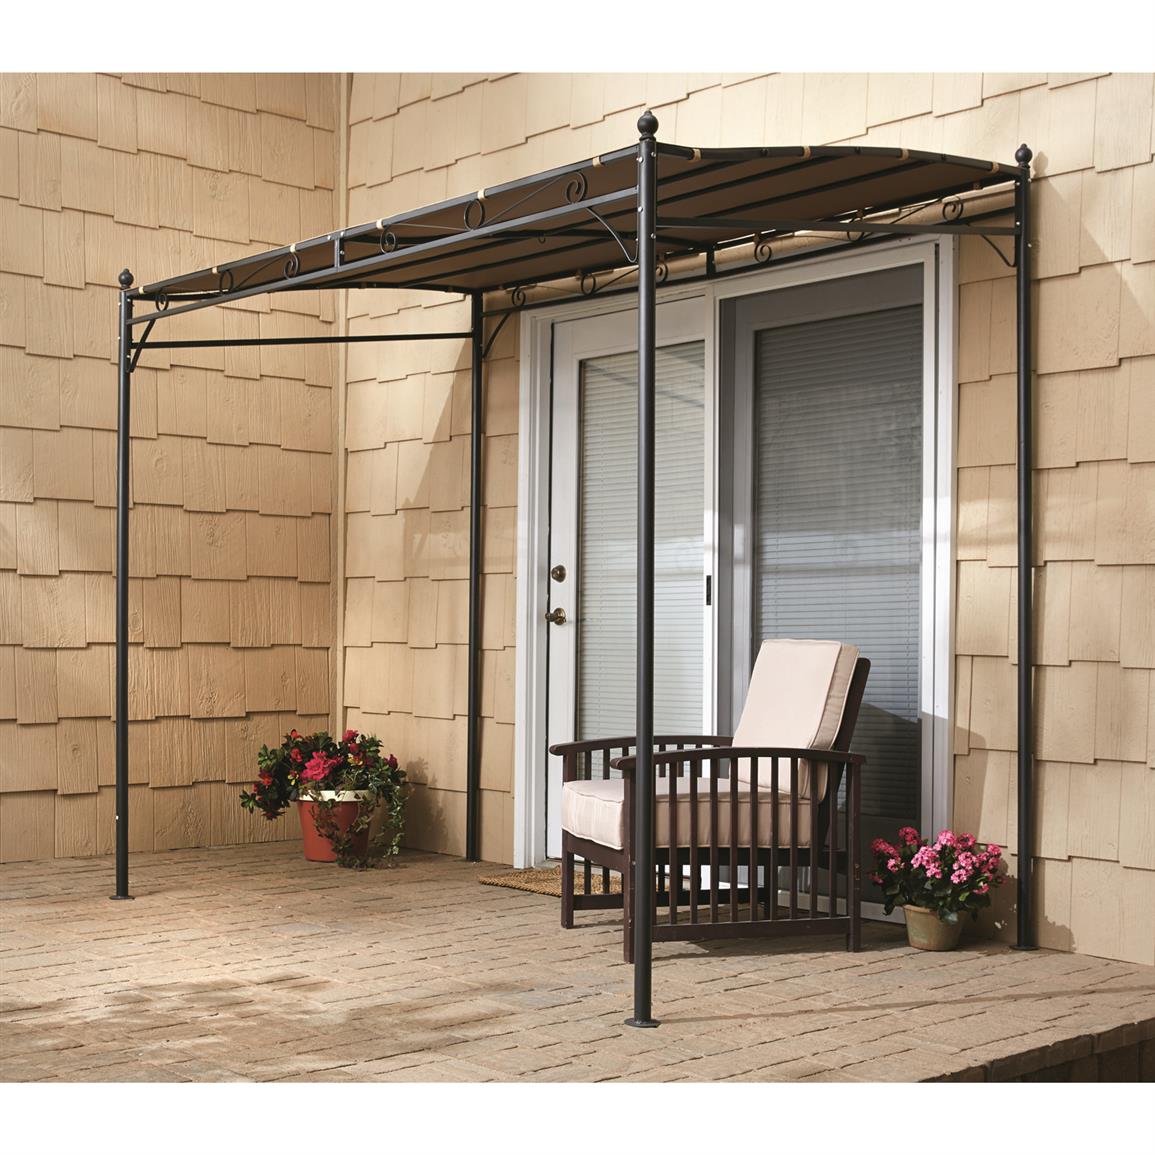 CASTLECREEK 4' Window and Door Awning Shades Cover Canopy with Study Steel Frame 